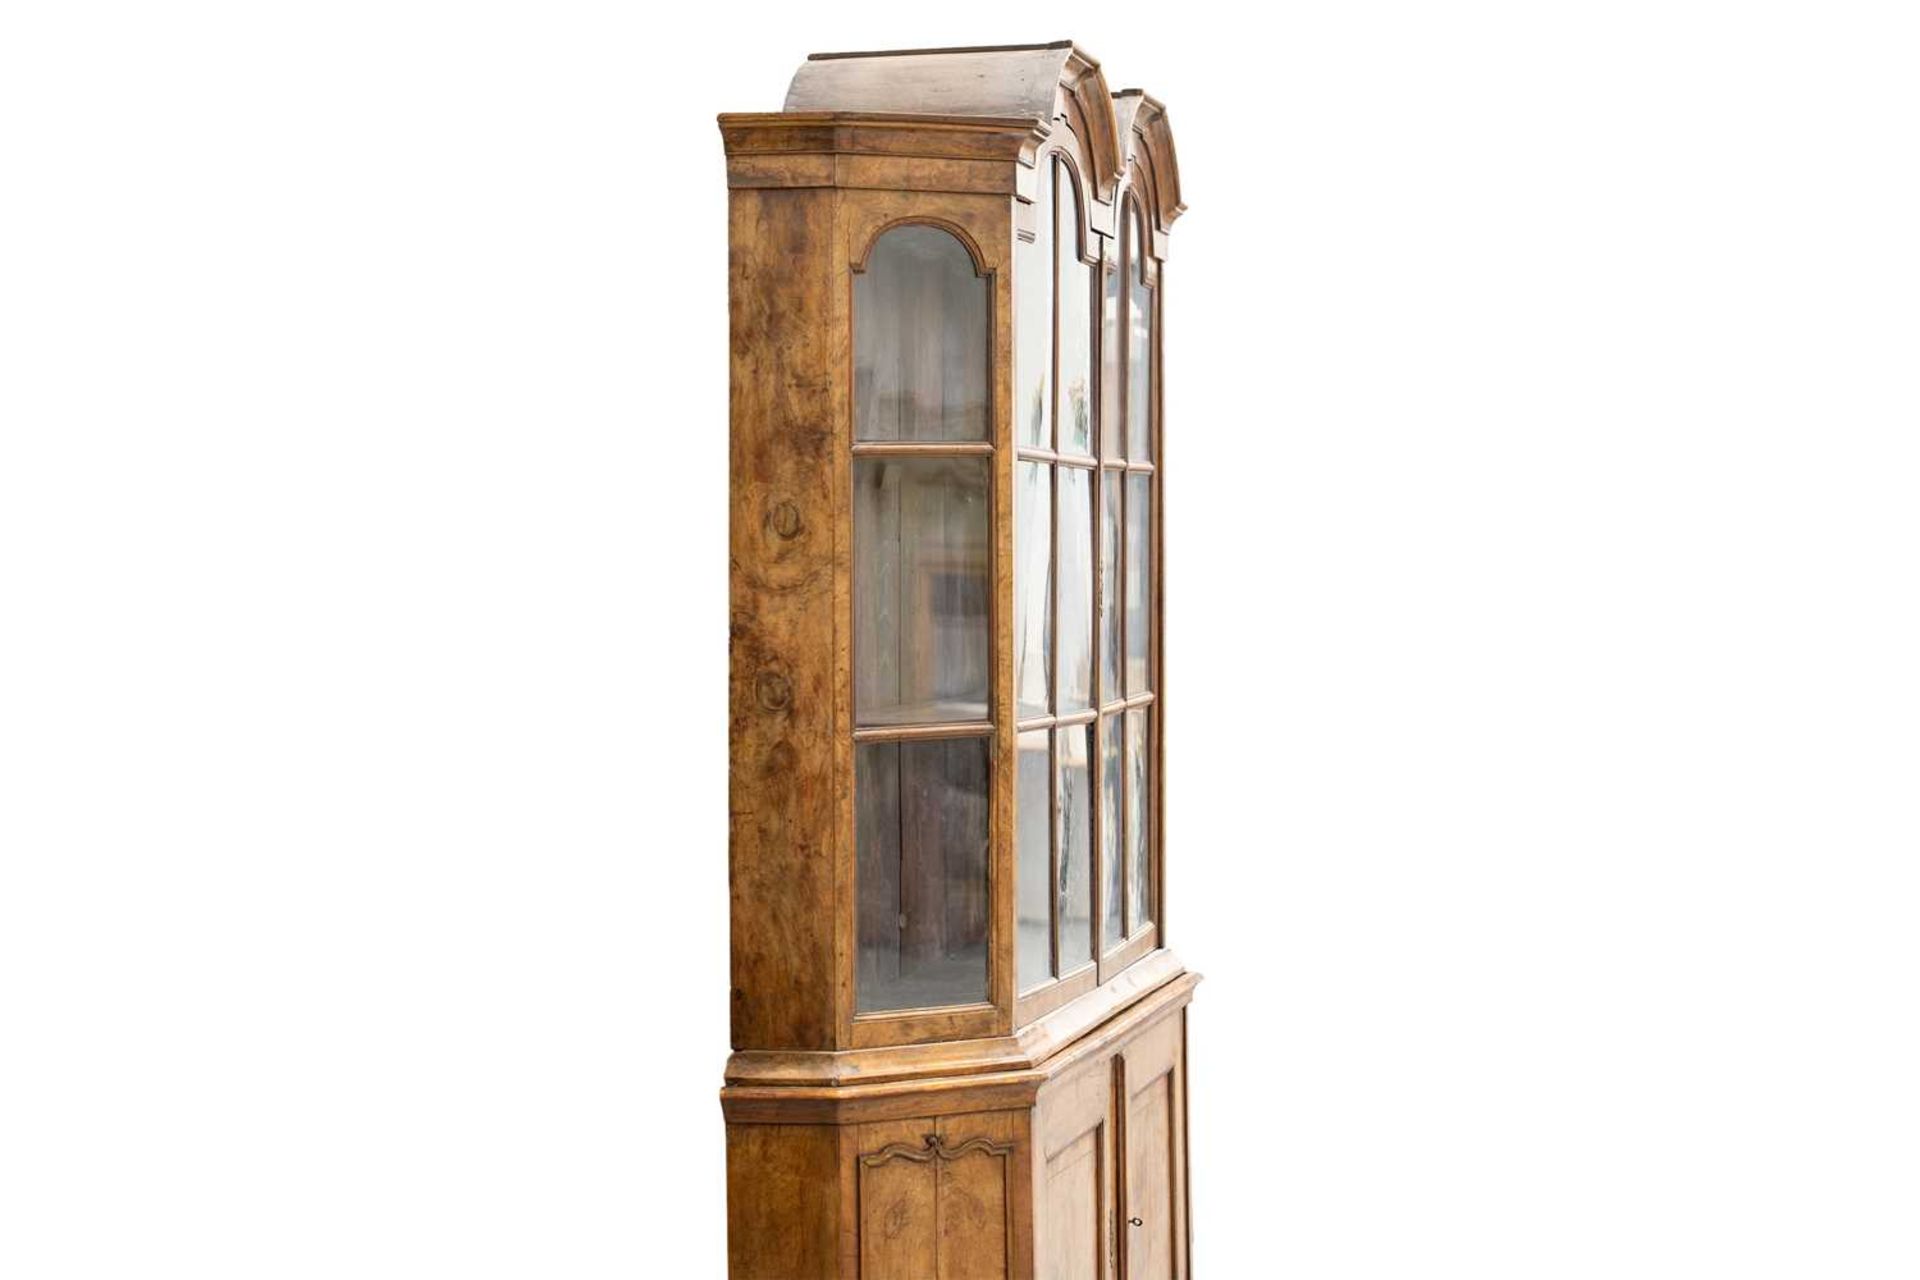 An early 18th-century style figured walnut double domed Dutch "Delft" canted display cabinet, early  - Image 3 of 10